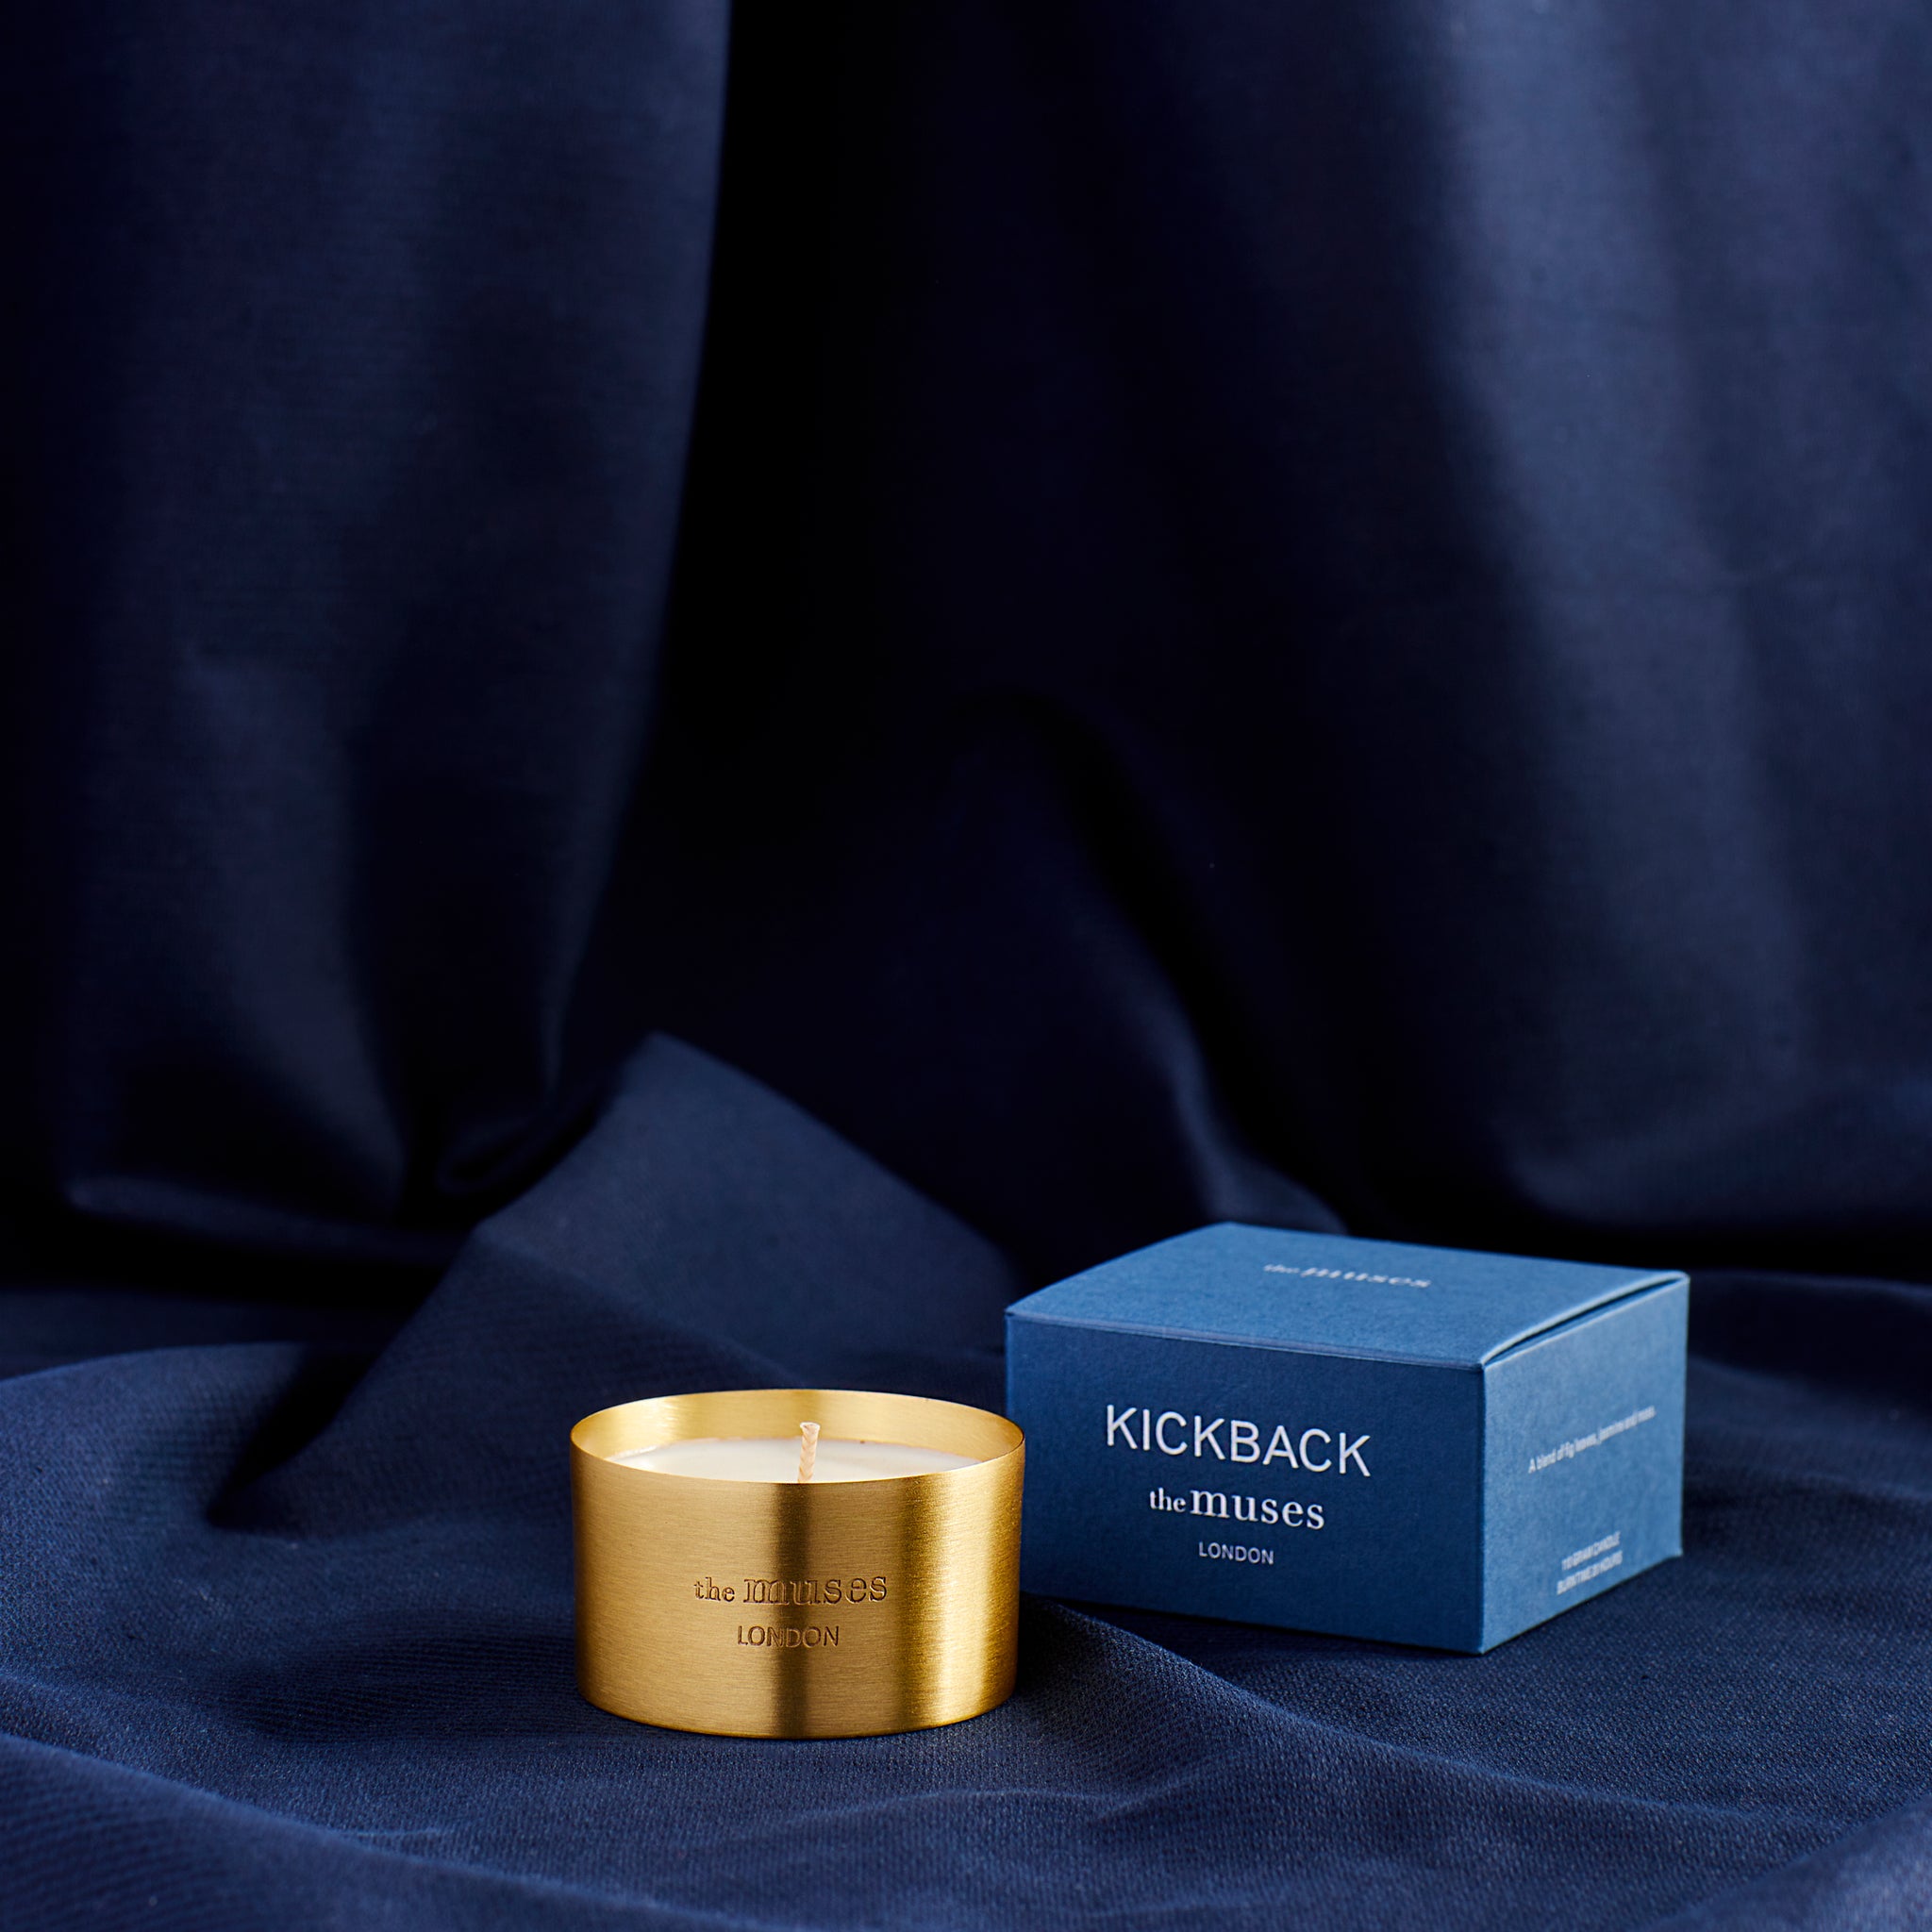 Kickback scented 100% natural wax candle 110g in pure brass container next to blue candle box with closed lid. Front